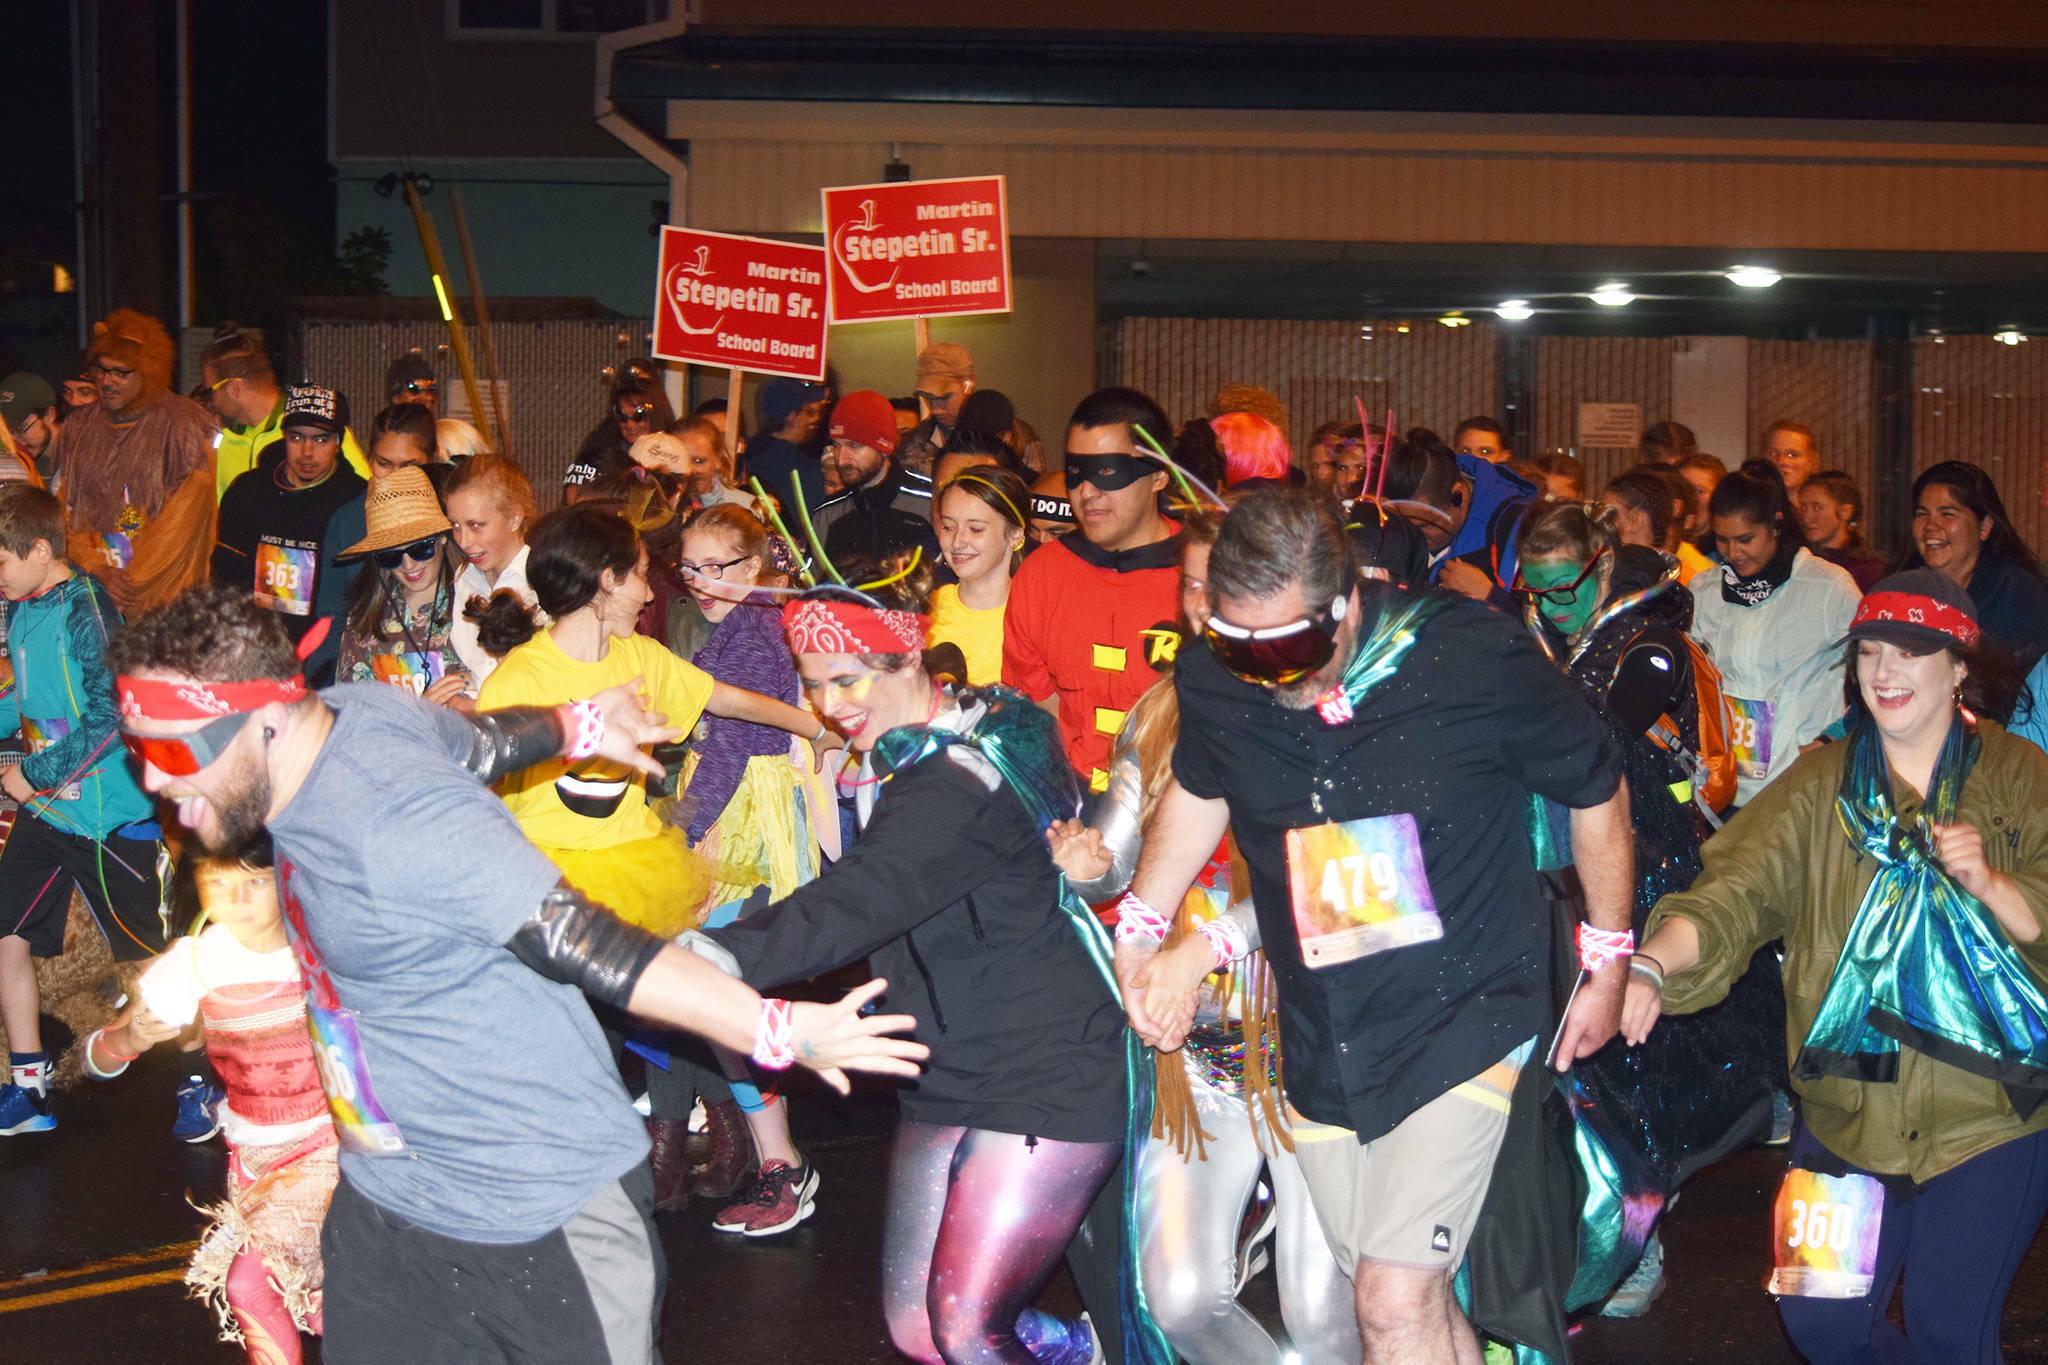 Runners take off from the starting line of the 35th annual Only Fools Run at Midnight at 11:59 p.m. on Saturday, Sept. 21, 2019. The event included a costume contest and 1-mile and 5-kilometer run/walk/wheelchair. The event is being revived this year at 9 p.m. Friday. (Nolin Ainsworth / Juneau Empire file photo)